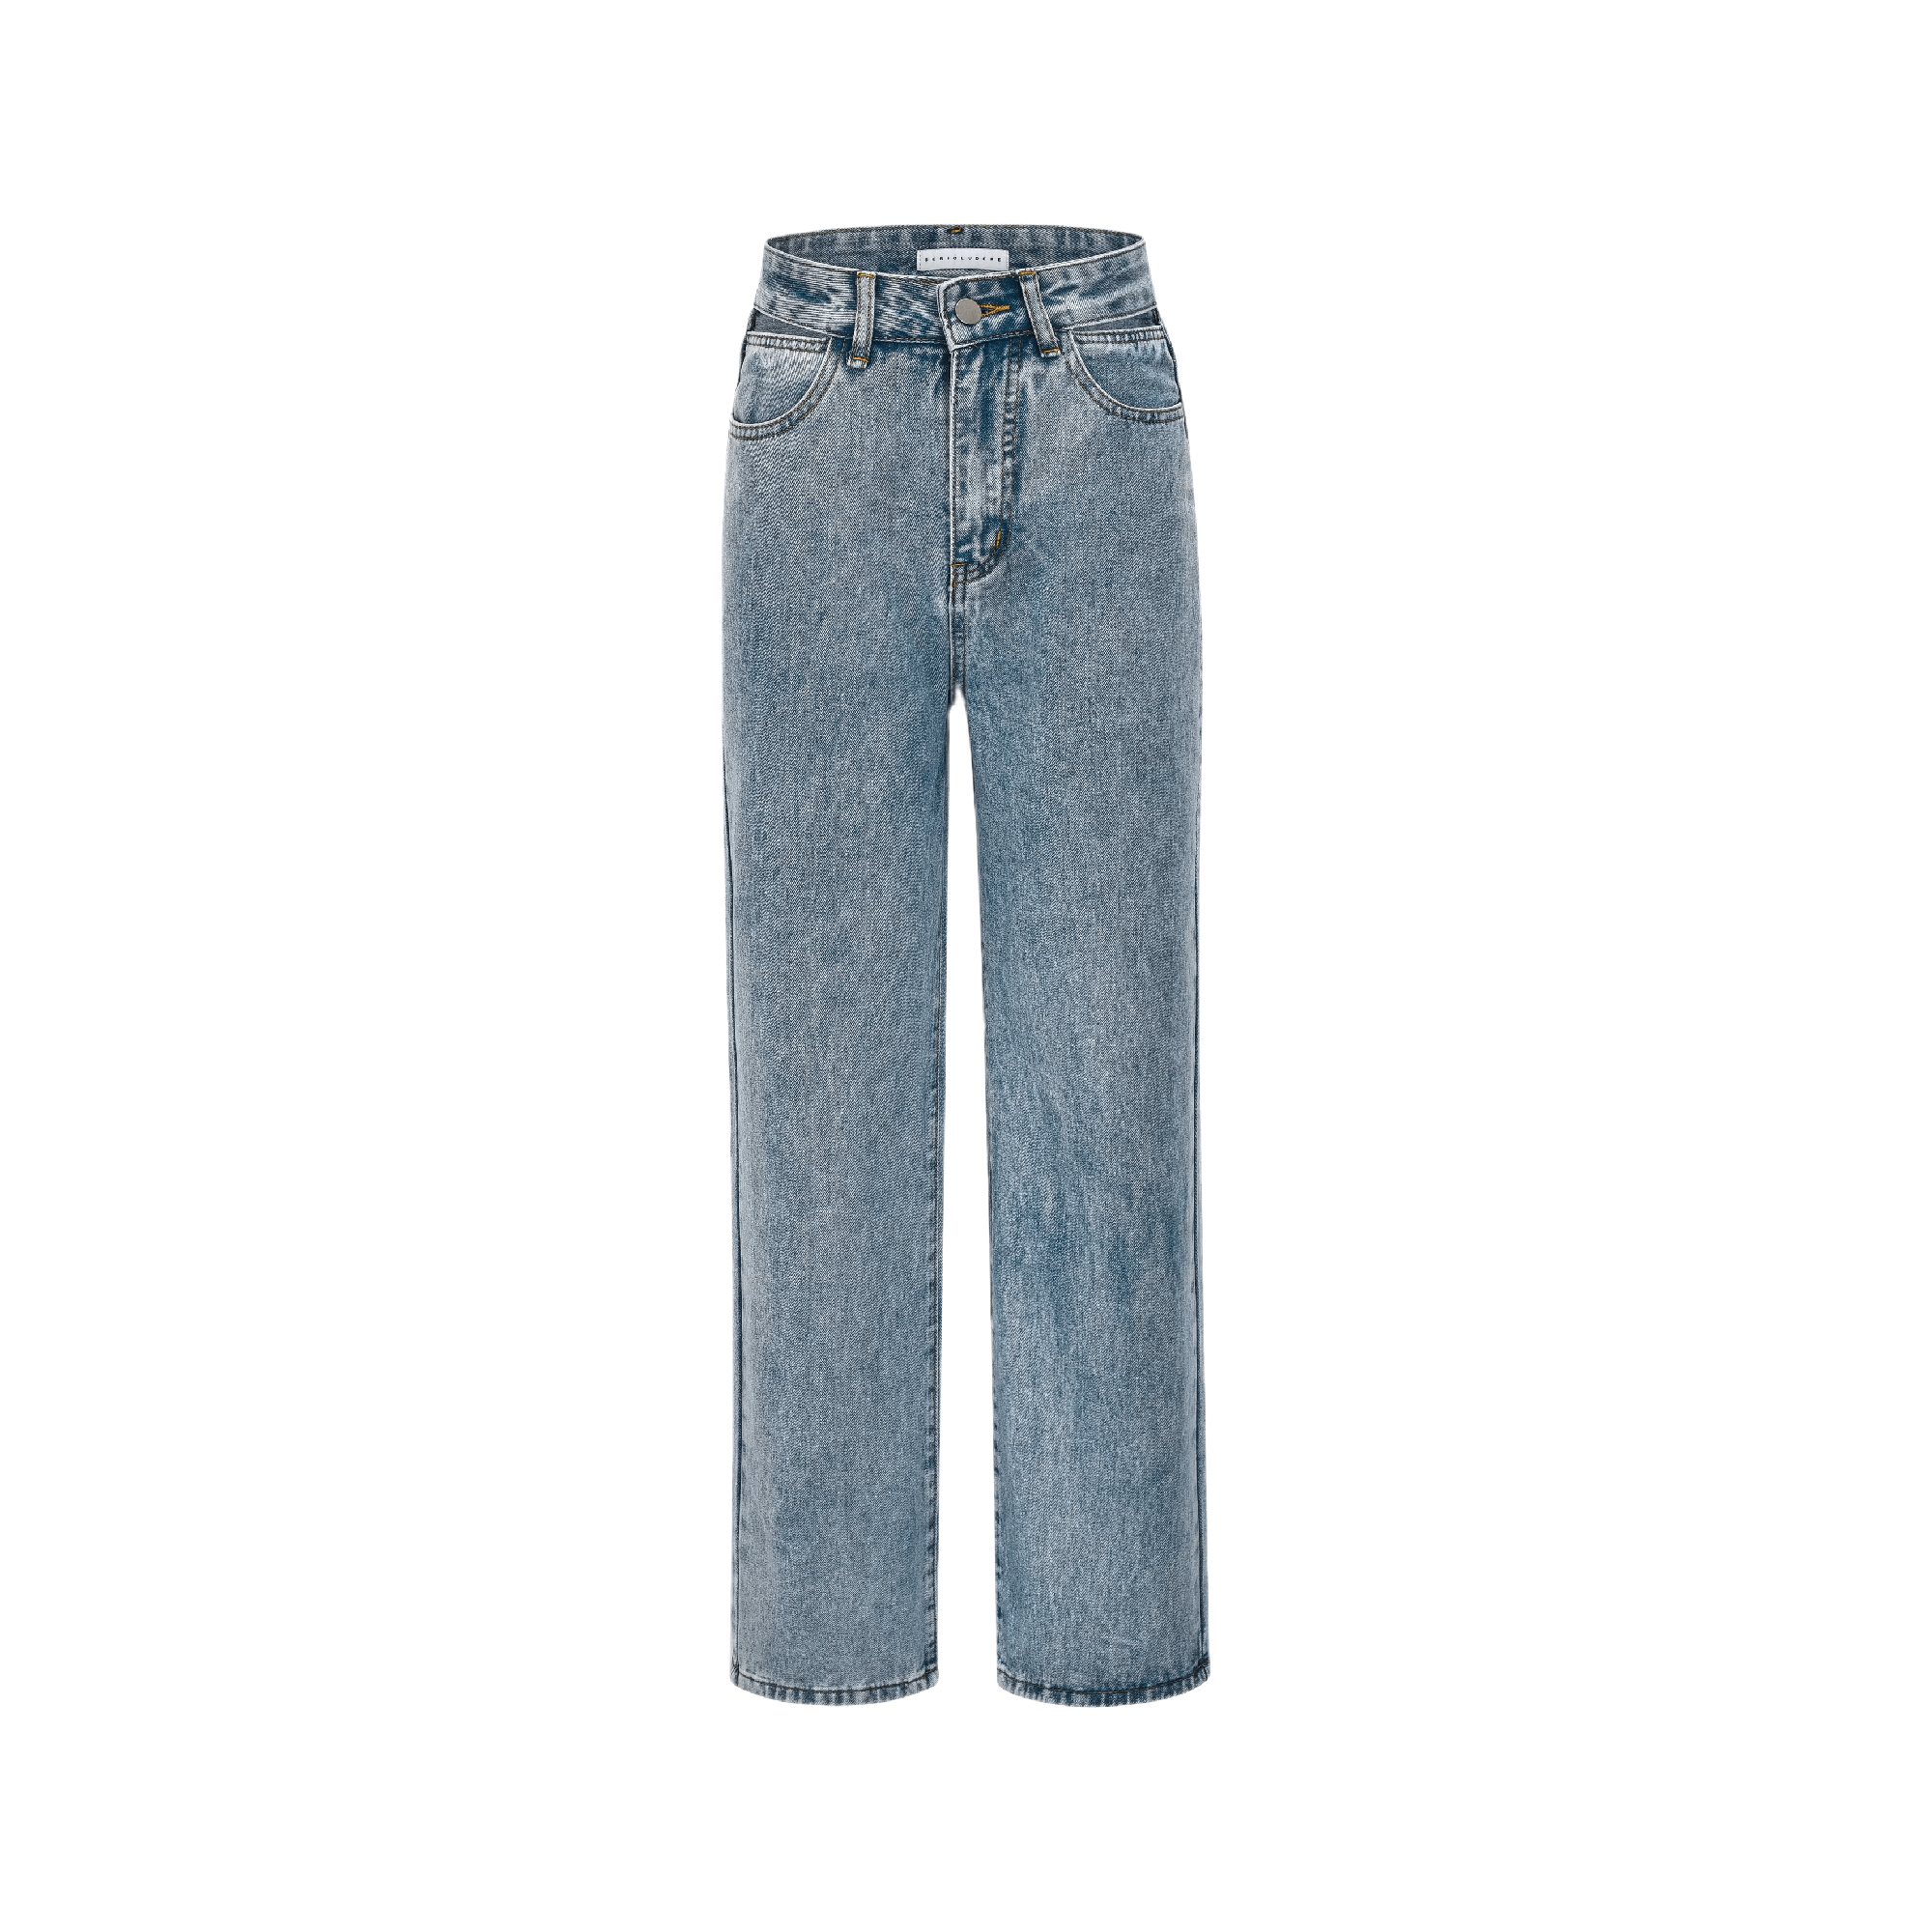 Serio Ludere-heart printed straight leg jeans - itsy, it‘s different